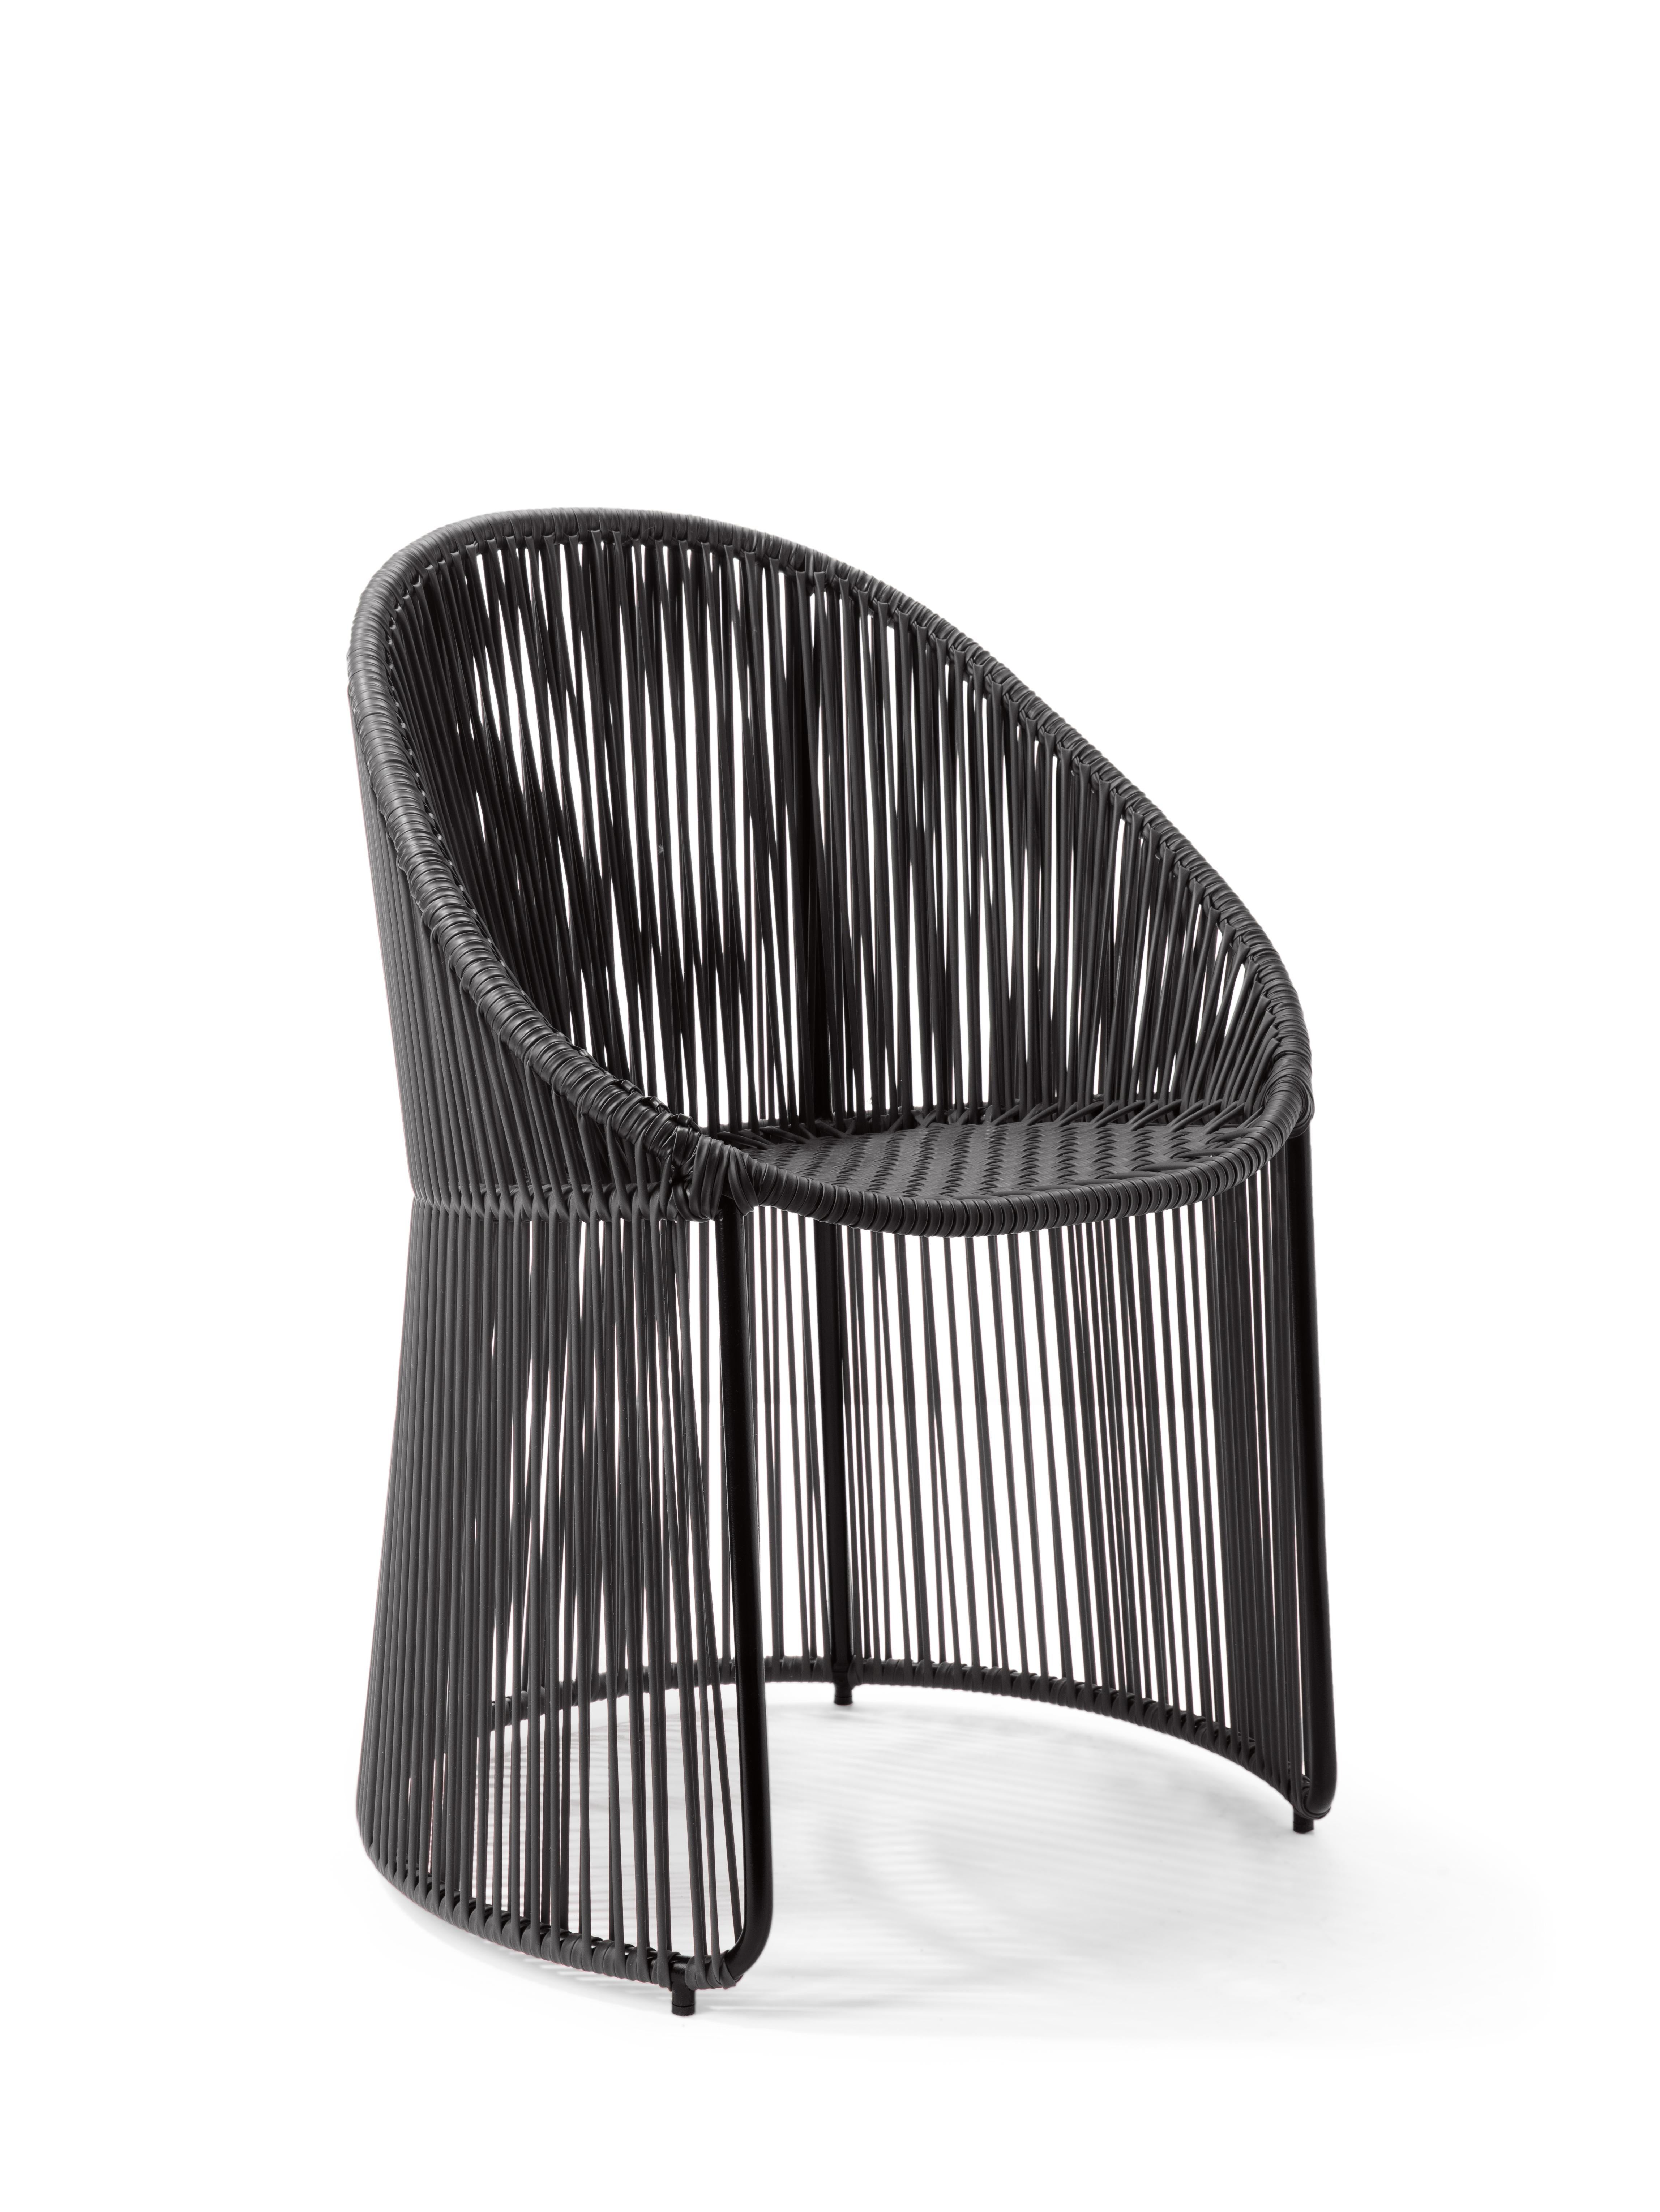 Black Cartagenas lounge chair by Sebastian Herkner
Materials: PVC strings. Galvanized and powder-coated tubular steel frame
Technique: made from recycled plastic. Weaved by local craftspeople in Colombia. 
Dimensions: W 64 x D 70 x H 74 cm